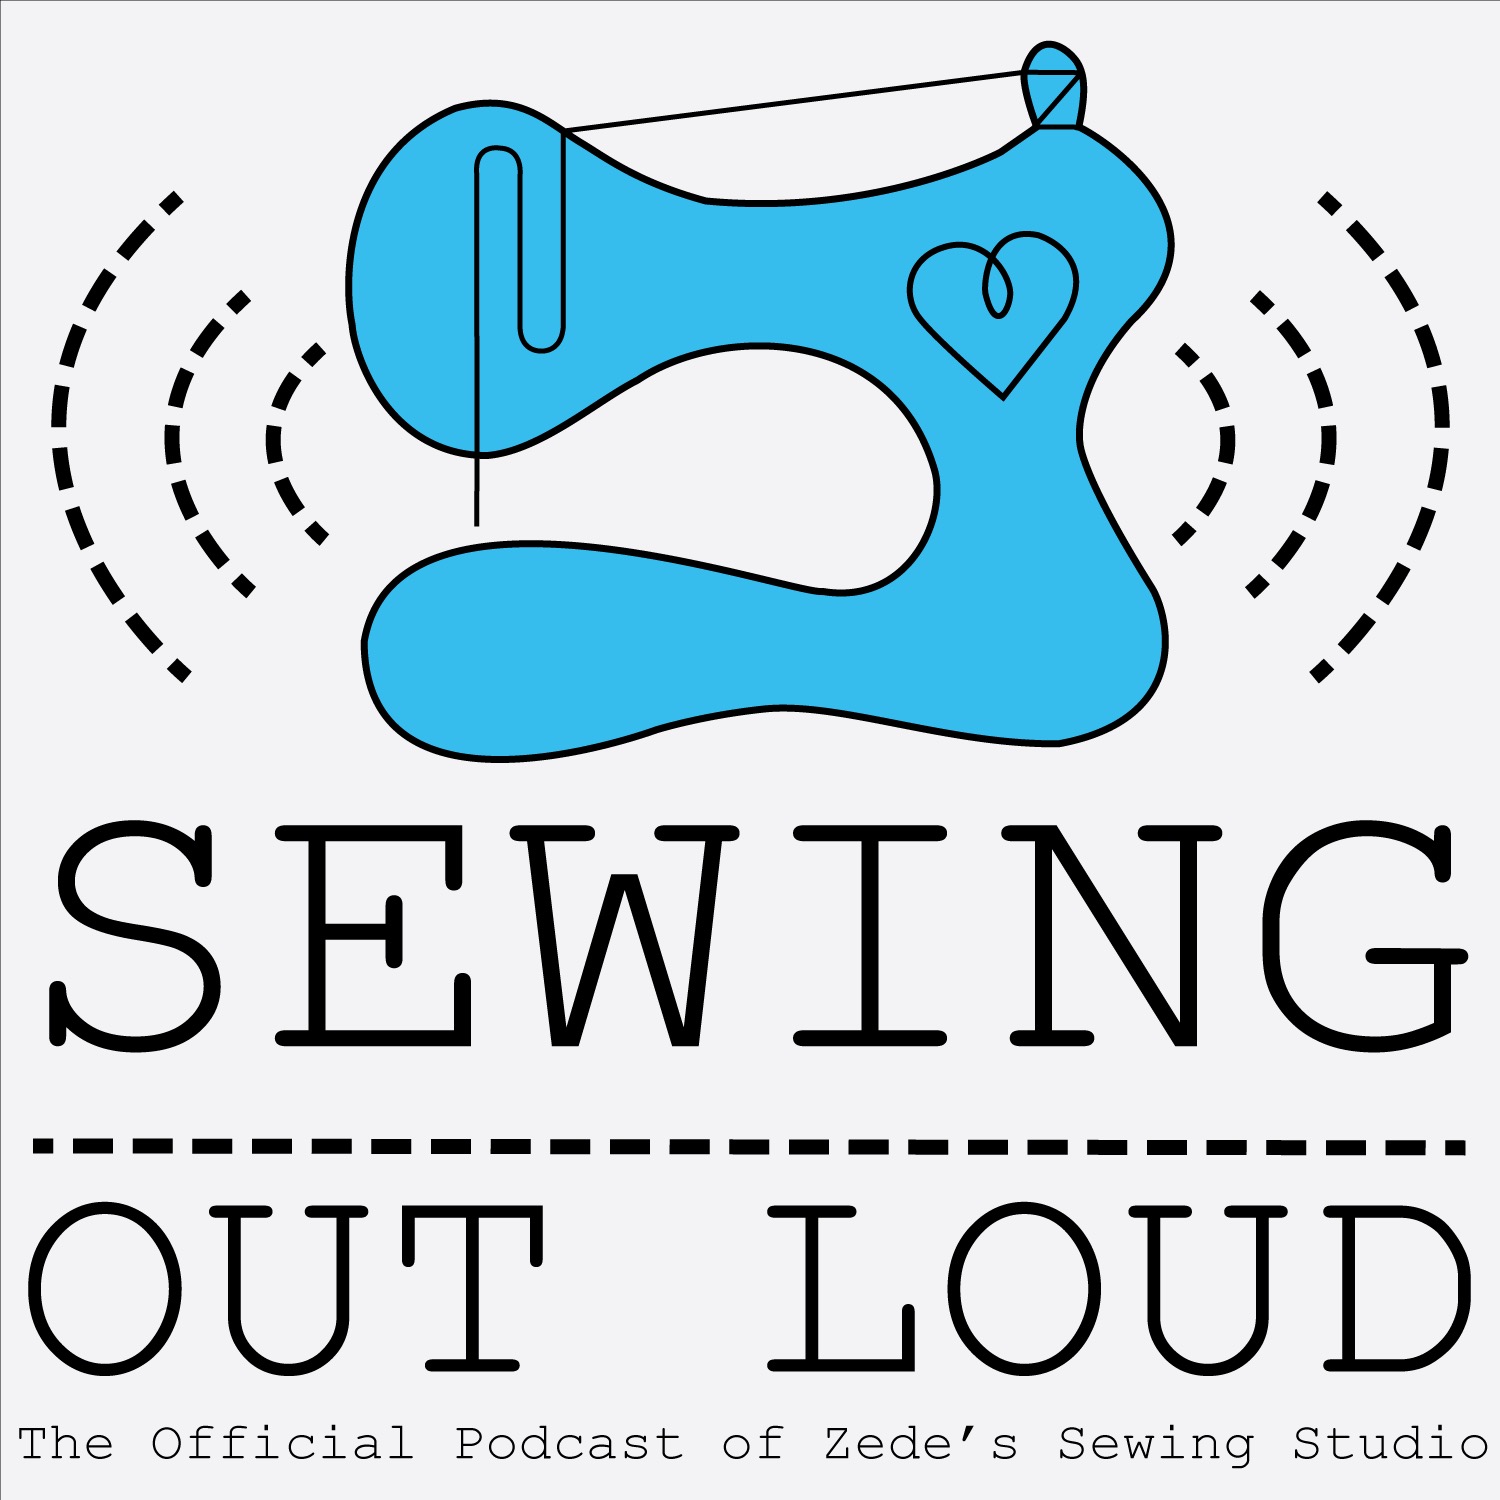 Your Sewing Goals